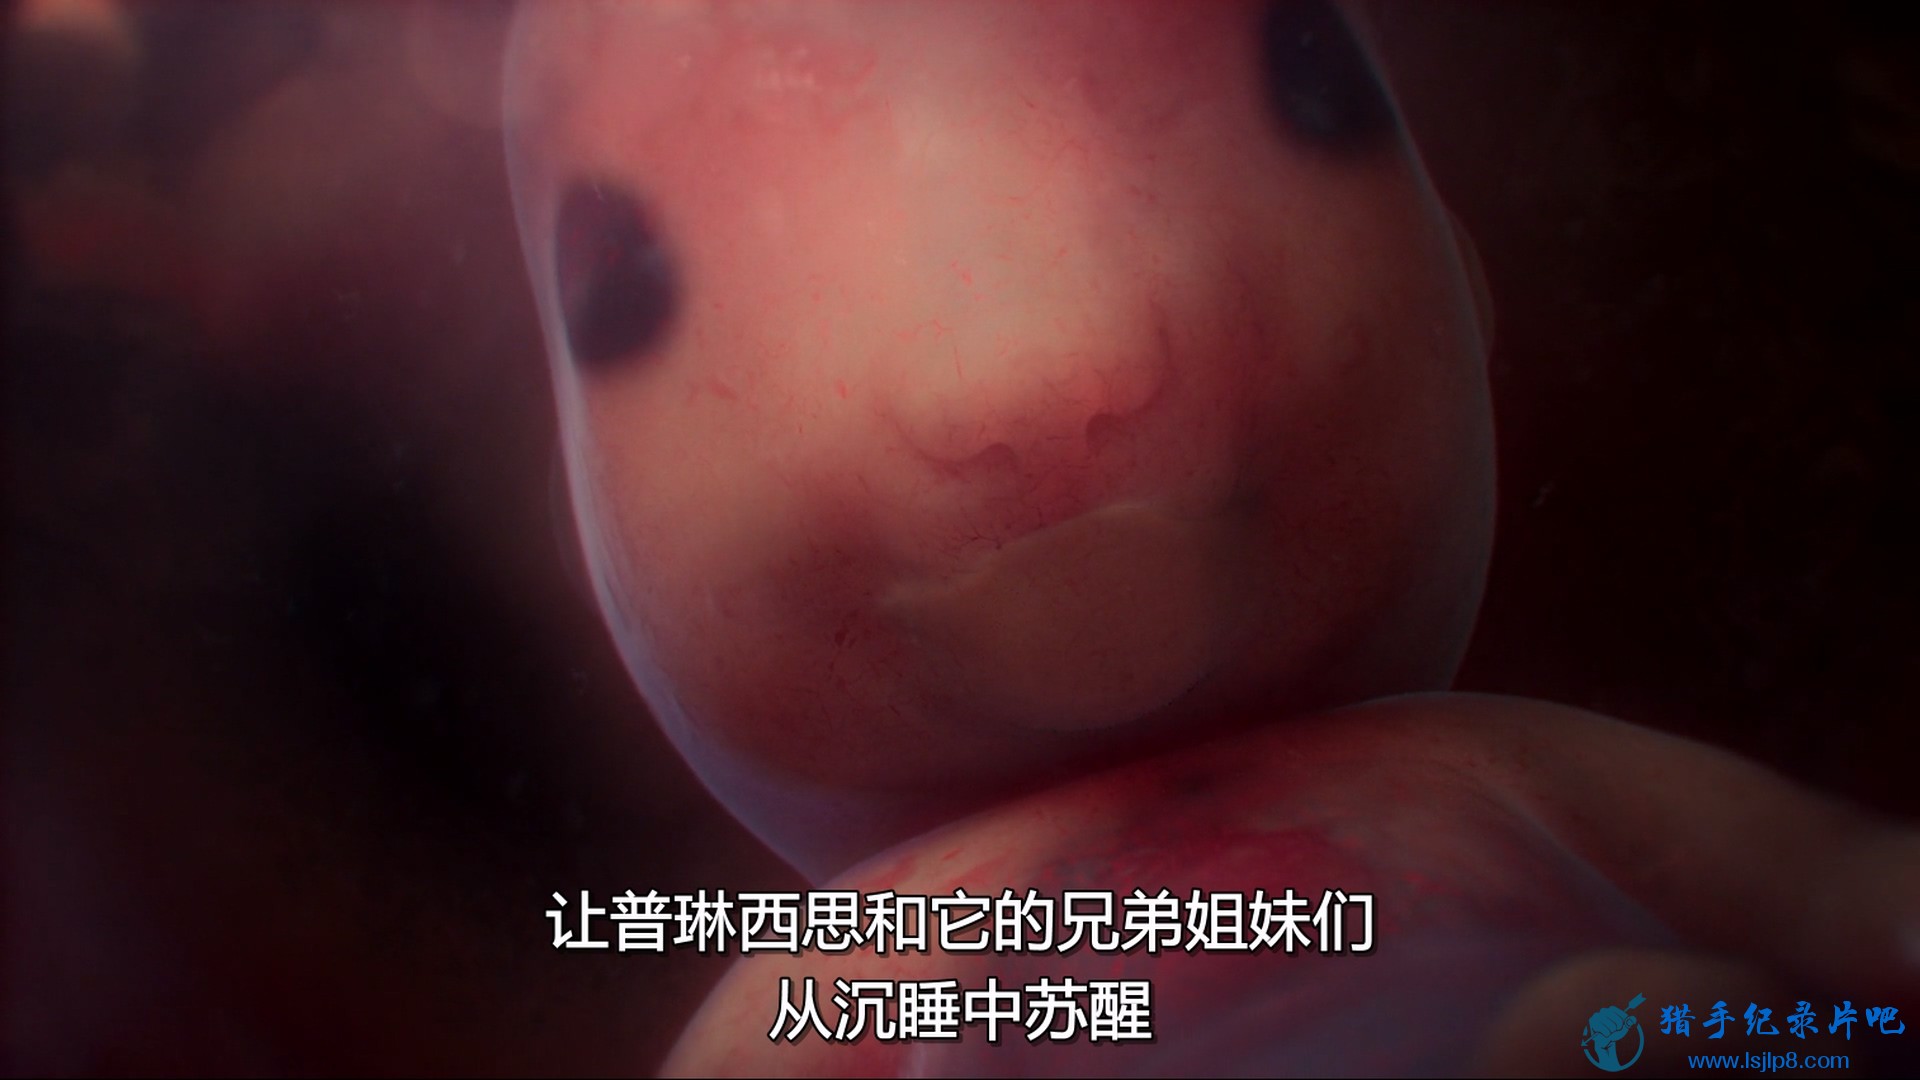 In.The.Womb.Animal.Babies.S01E01.1080p.DSNP.WEB-DL.DD5.1.H.264-PlayWEB.mkv_20240.jpg